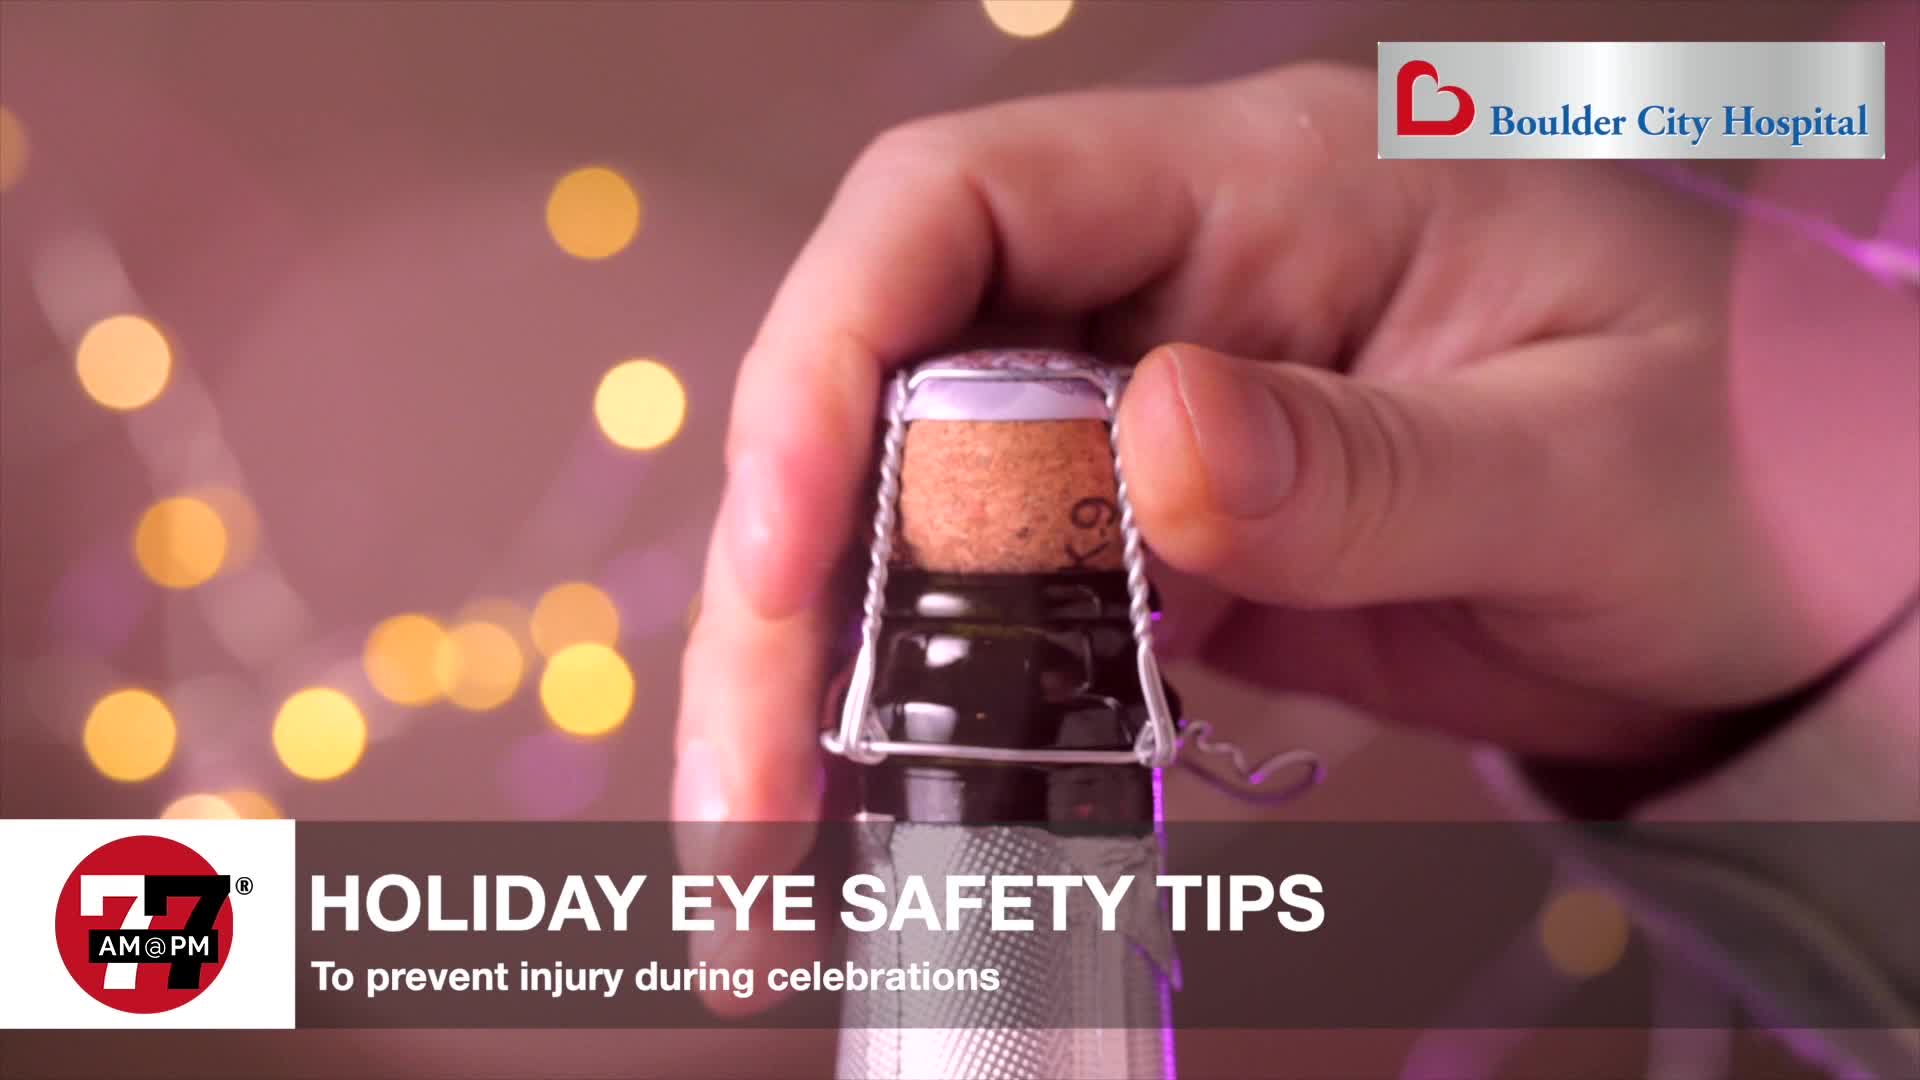 Holiday safety tips